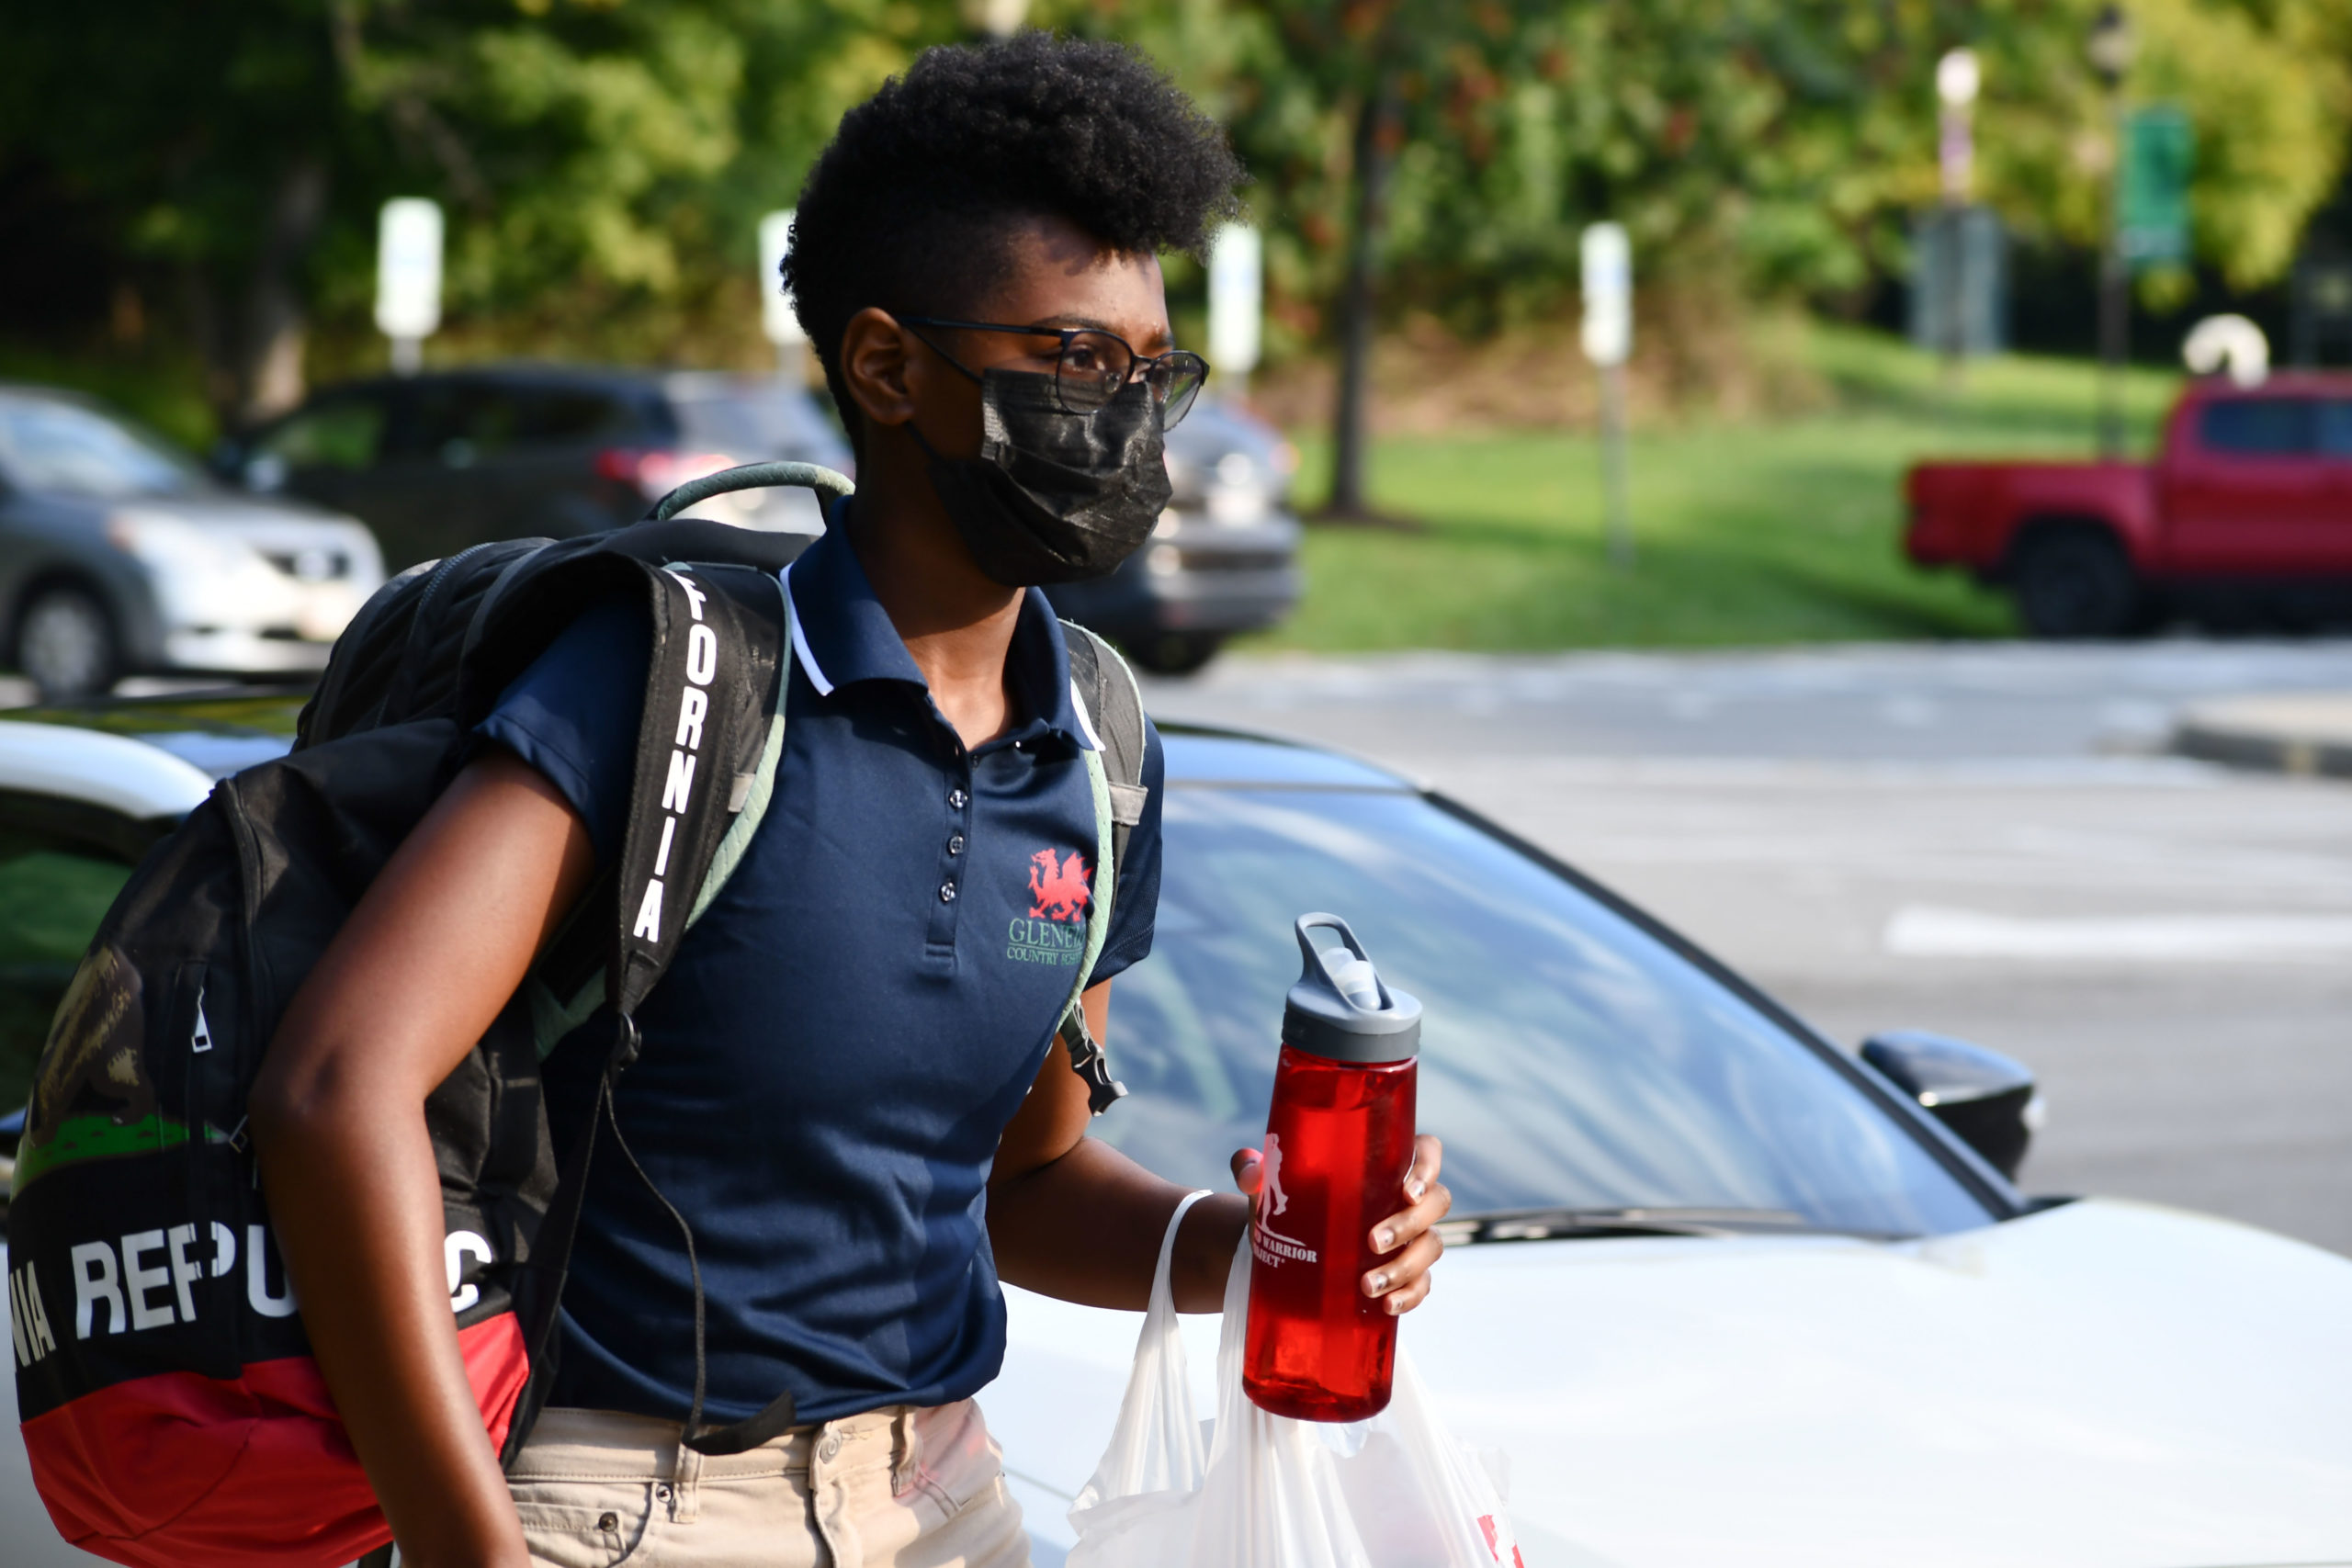 An Upper School student walks outside of the Upper School on the first day of school in September 2021.